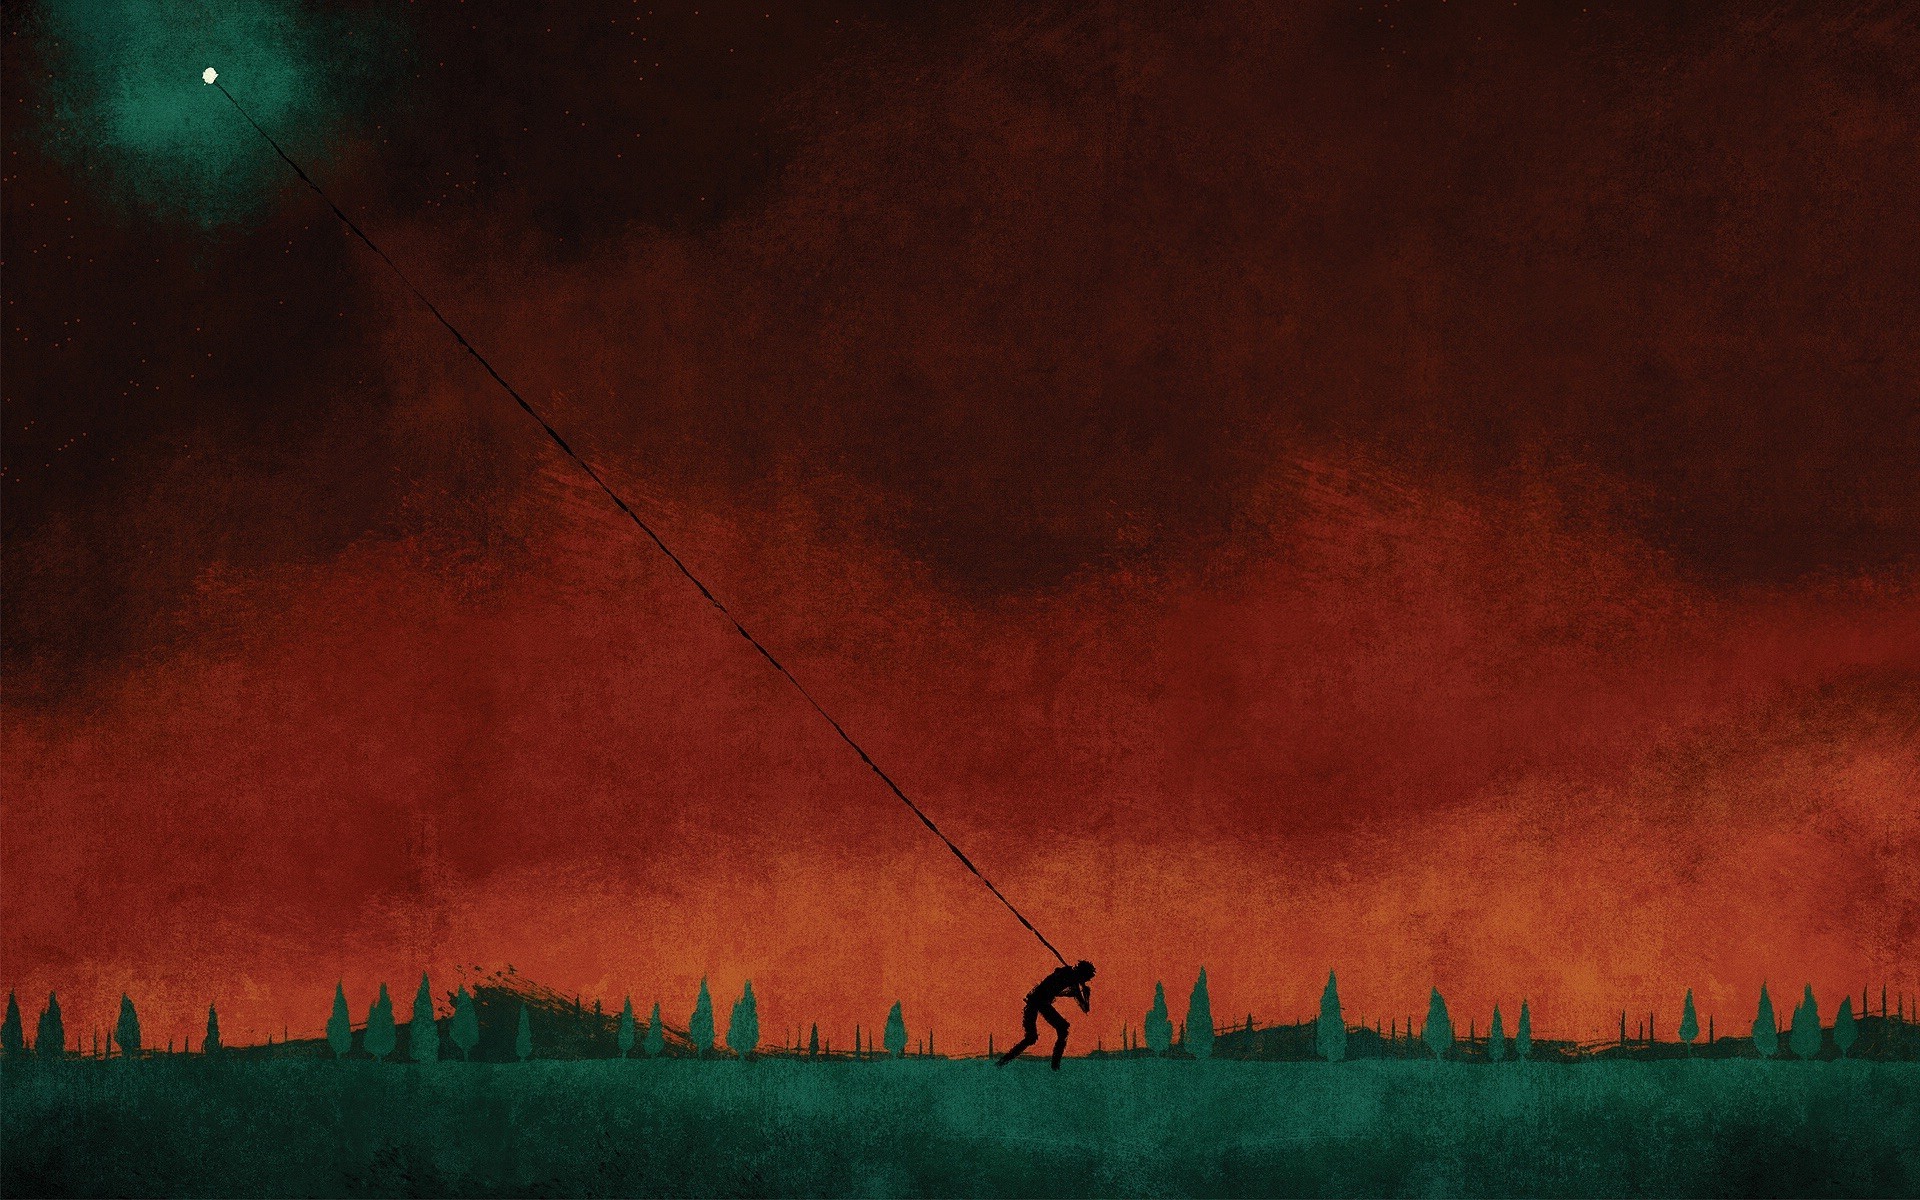 digital Art, People, Painting, Artwork, Silhouette, Nature, Field, Album Covers, Cover Art, August Burns Red, Trees, Ropes, Moon, Hill, Red Wallpaper